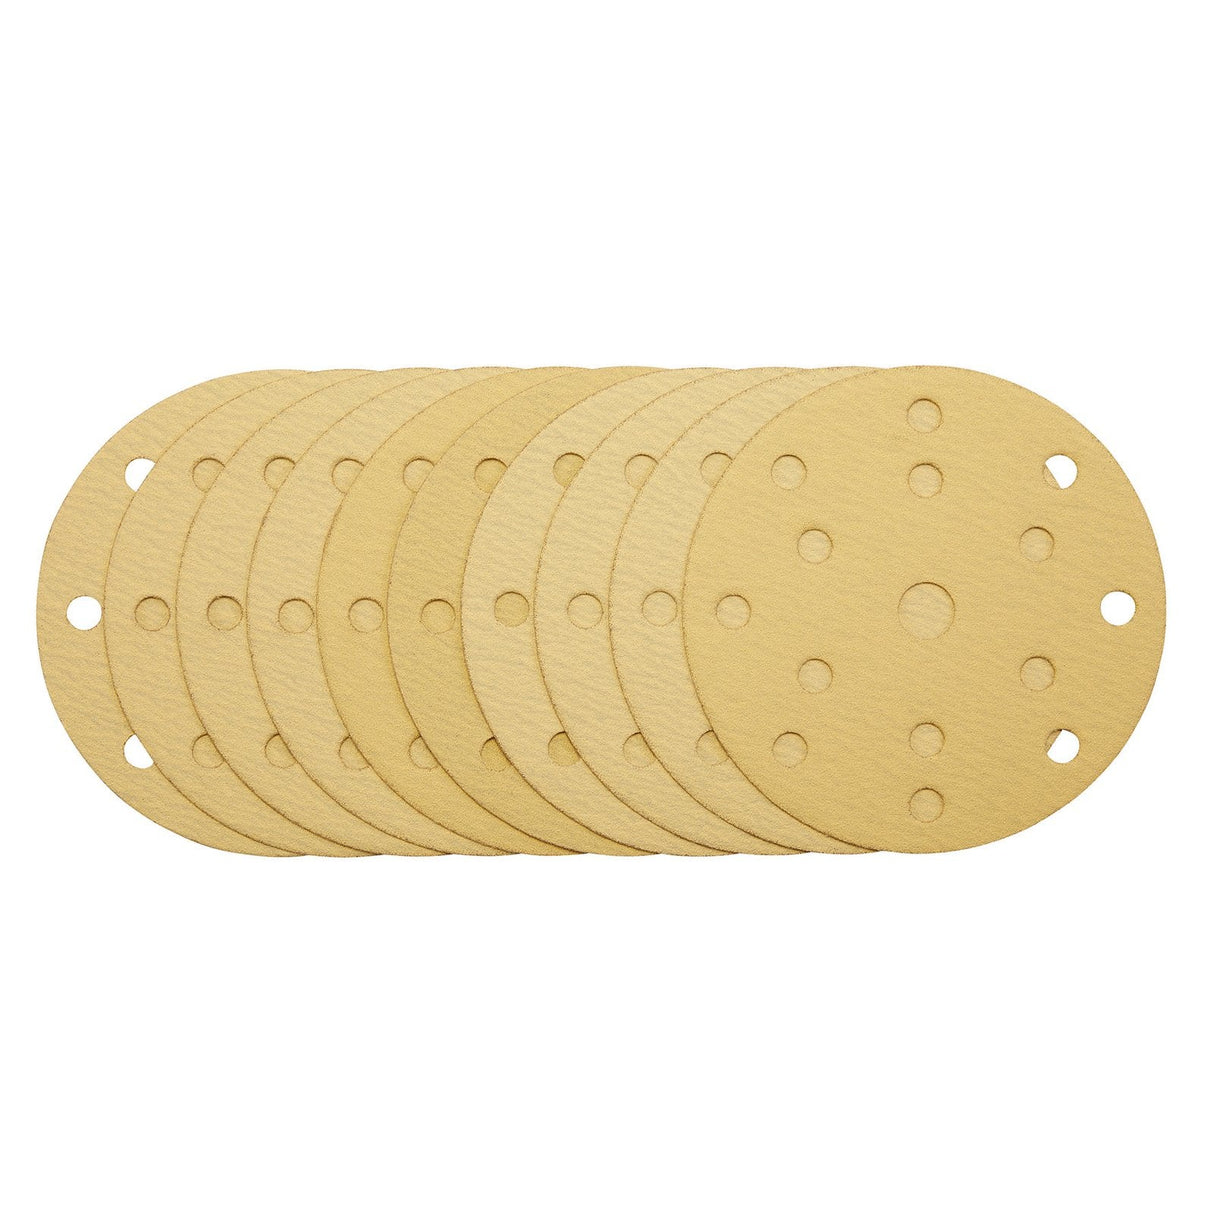 Draper Gold Sanding Discs With Hook & Loop, 150mm, 120 Grit, 15 Dust Extraction Holes (Pack Of 10) - SDHLG150 - Farming Parts